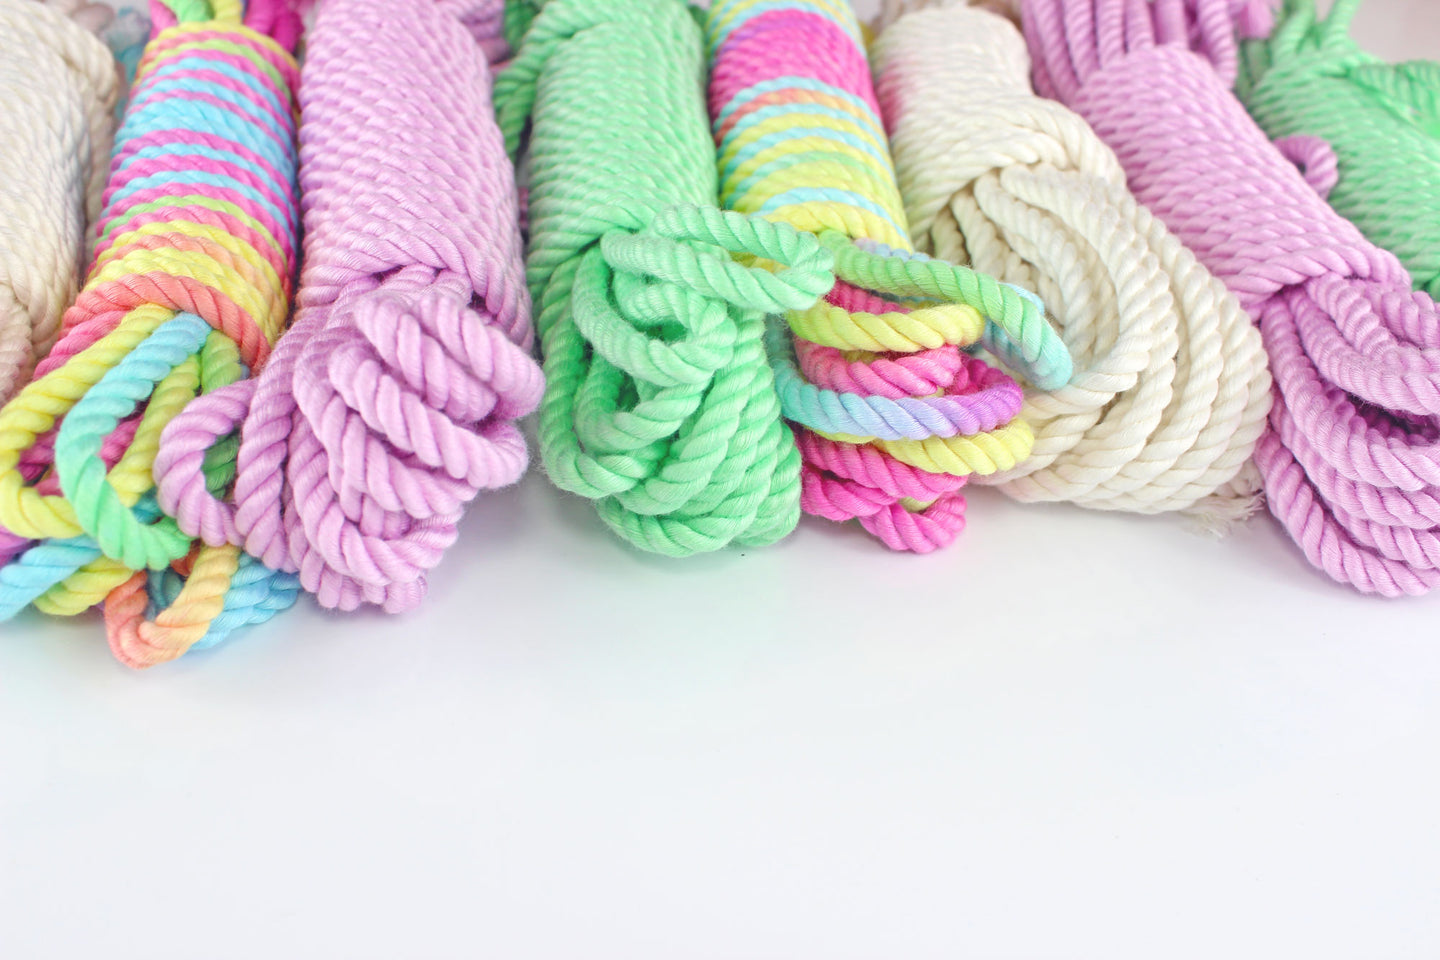 Bundles of bamboo silk rope in various colors (rainbow multicolor, lavender, mint, and white) on a white background